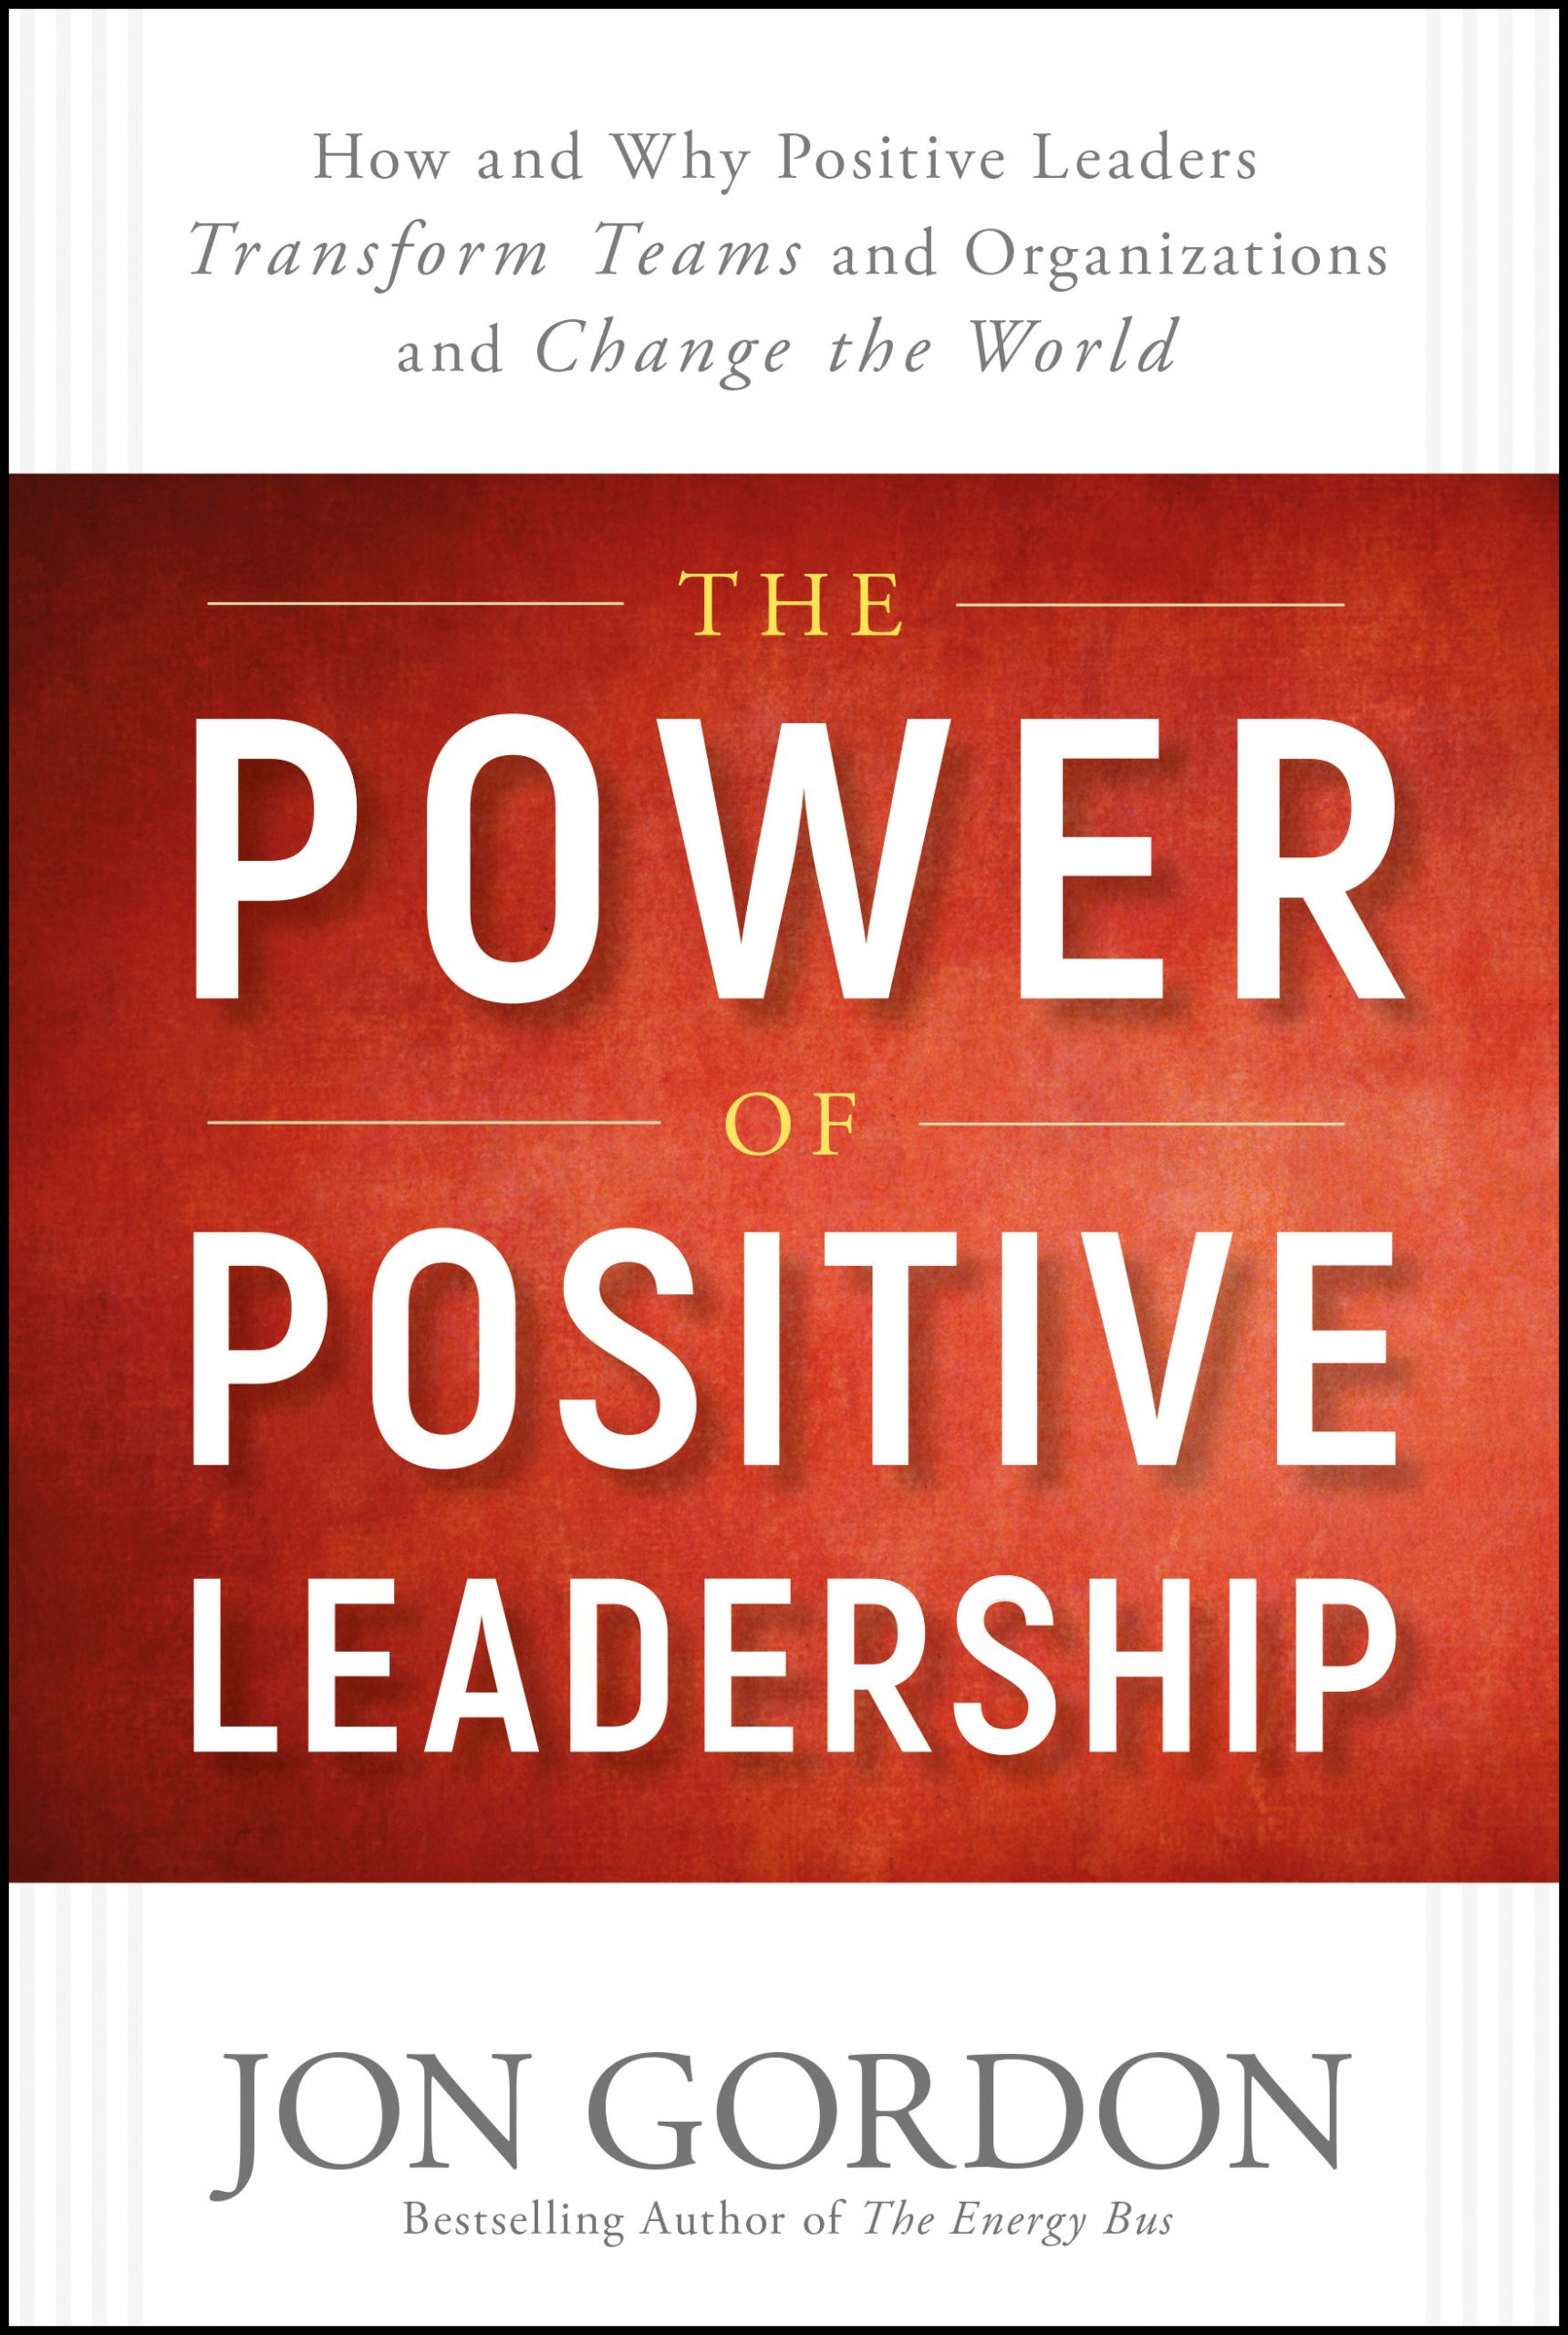 Positive Leadership Quotes
 The Power of Positive Leadership How and Why Positive